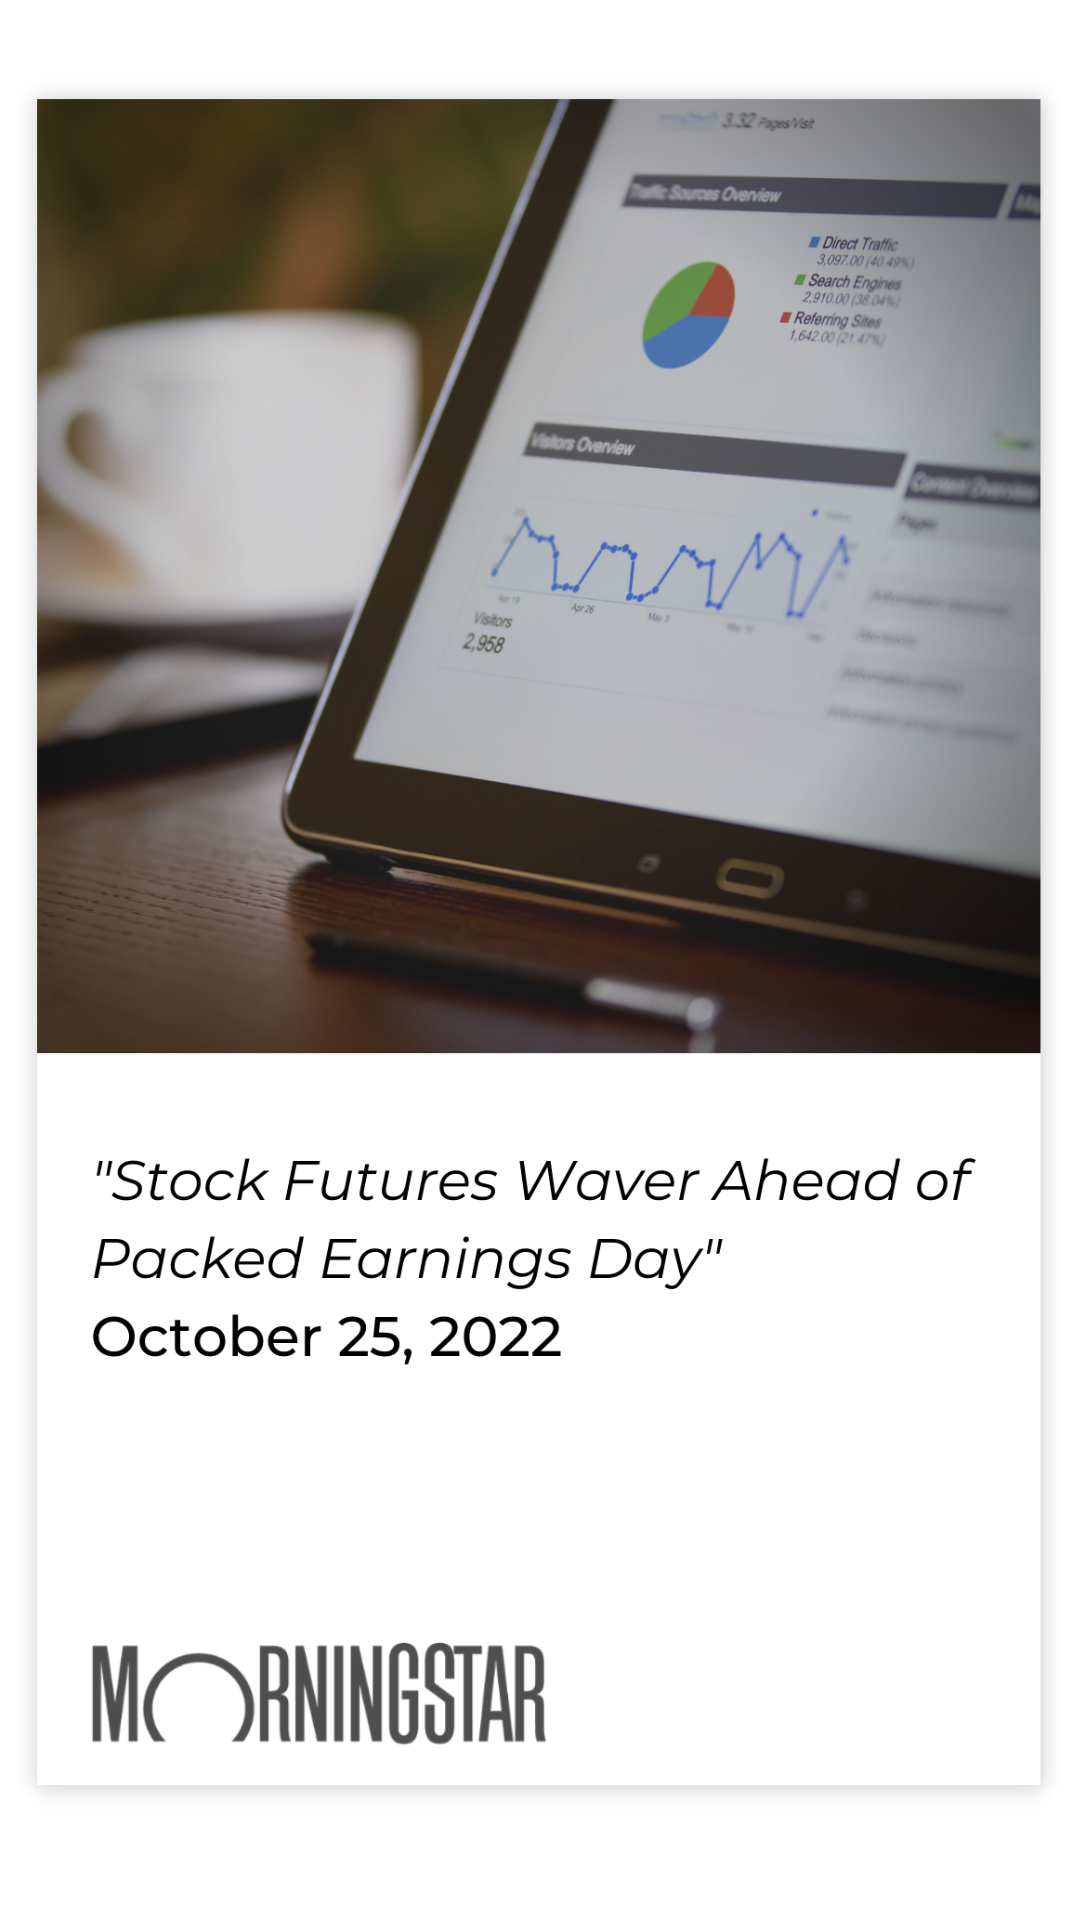 Stock Futures Waver Ahead of Packed Earnings Day